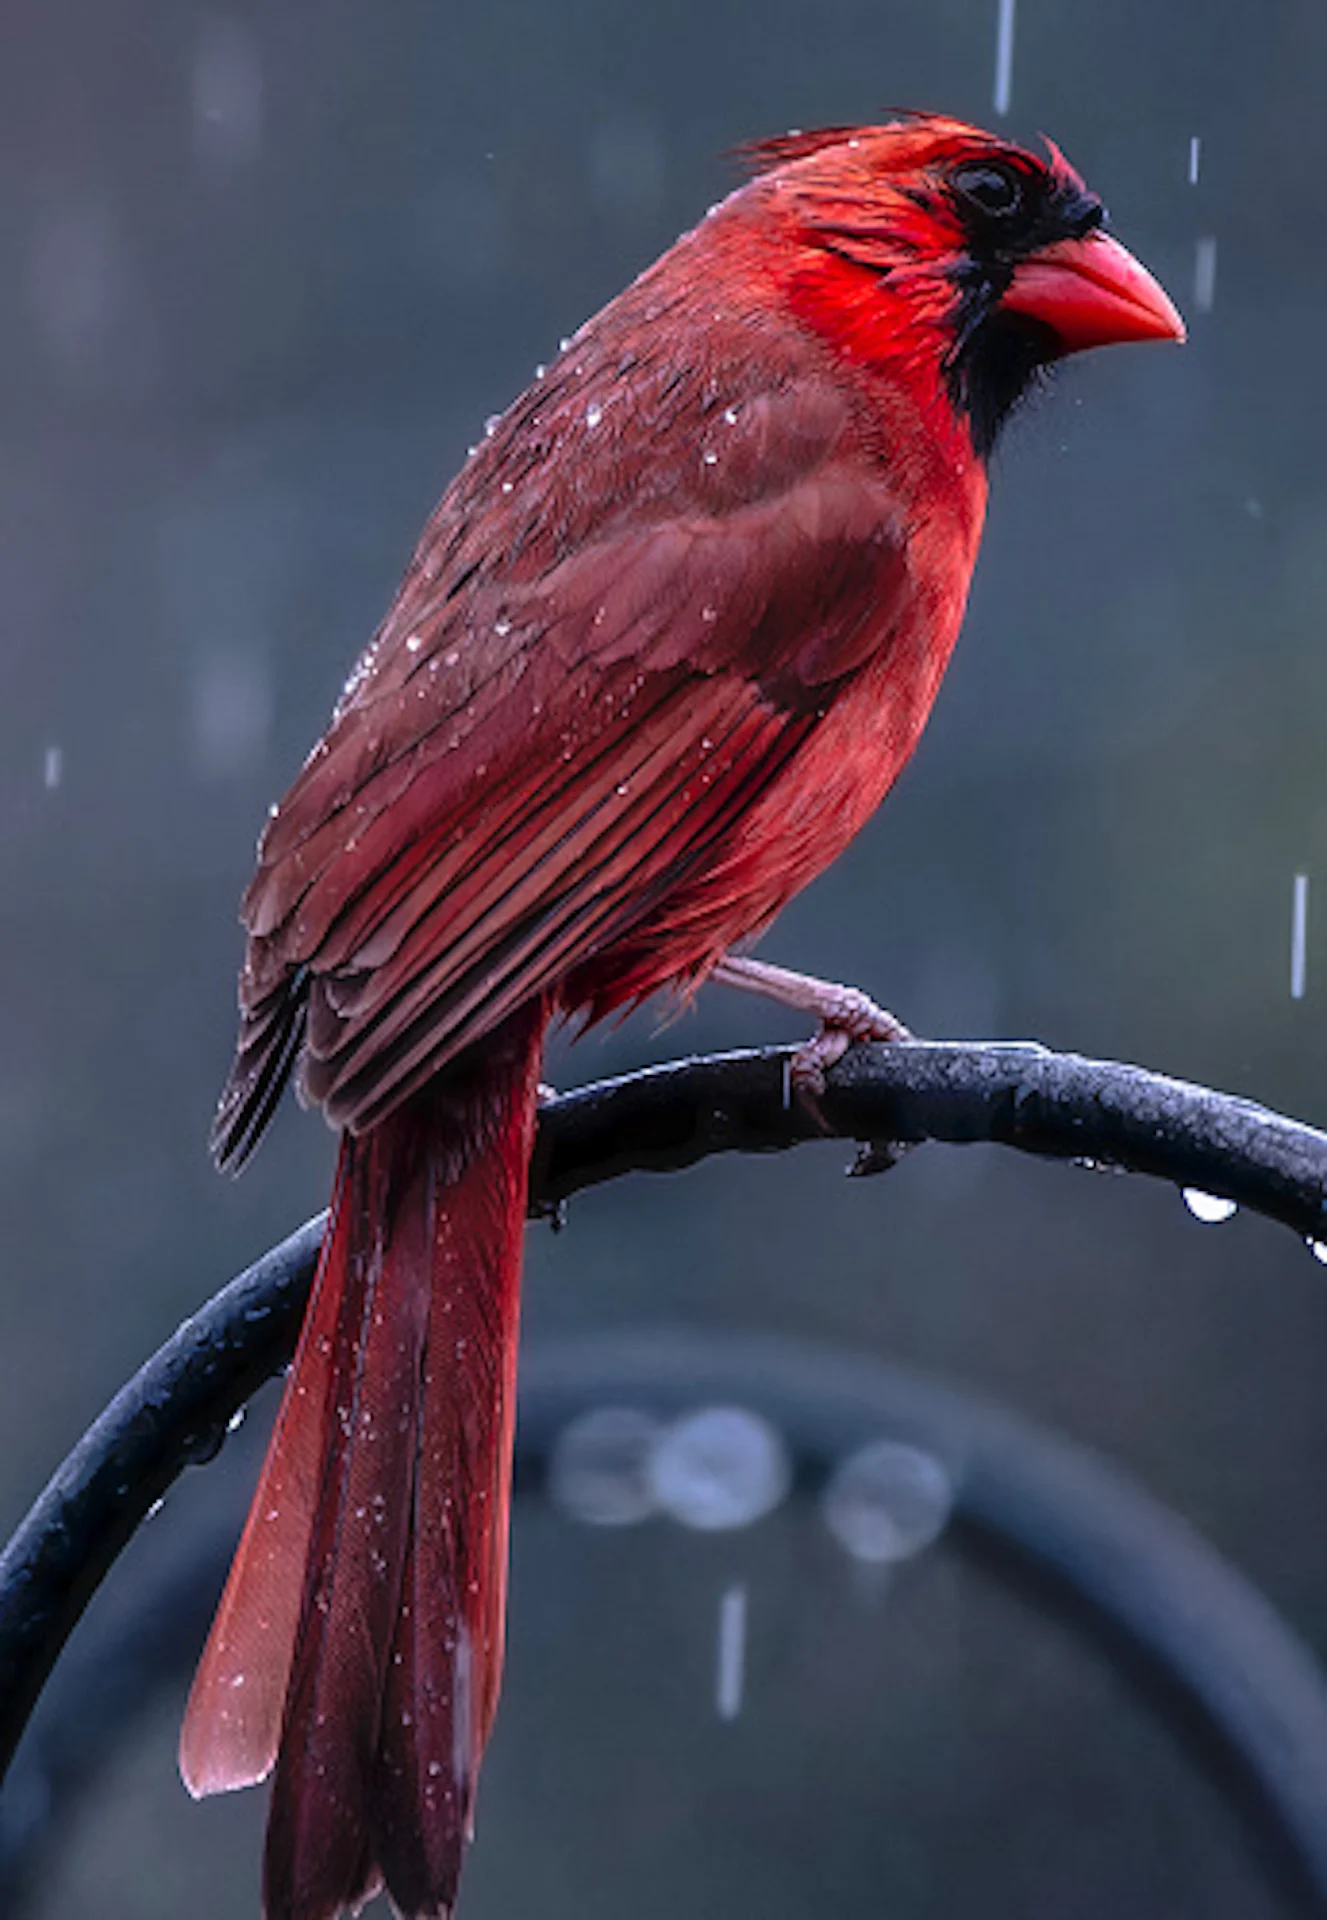 Northern cardinal/Getty Images/blightylad-infocus/2110450158-170667a